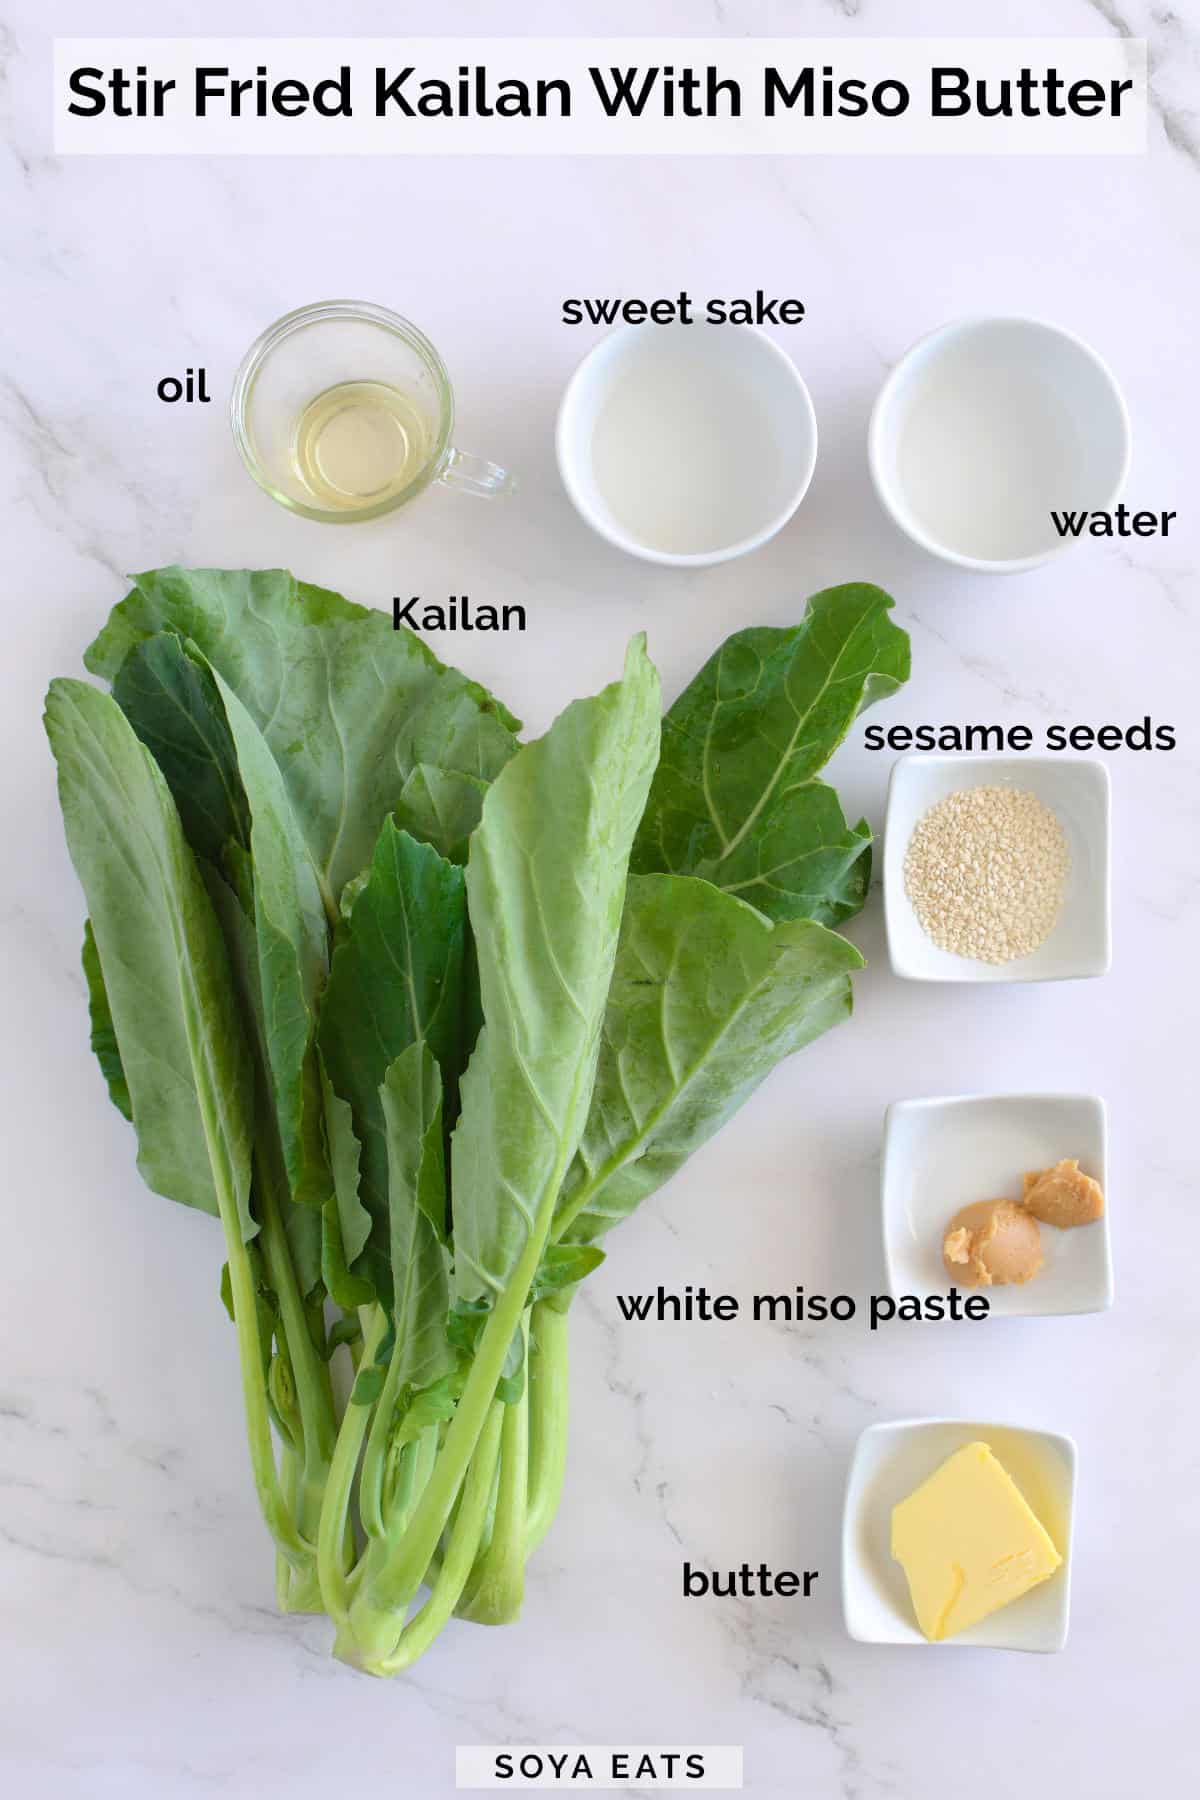 Image of ingredients needed to make Asian greens with miso butter.